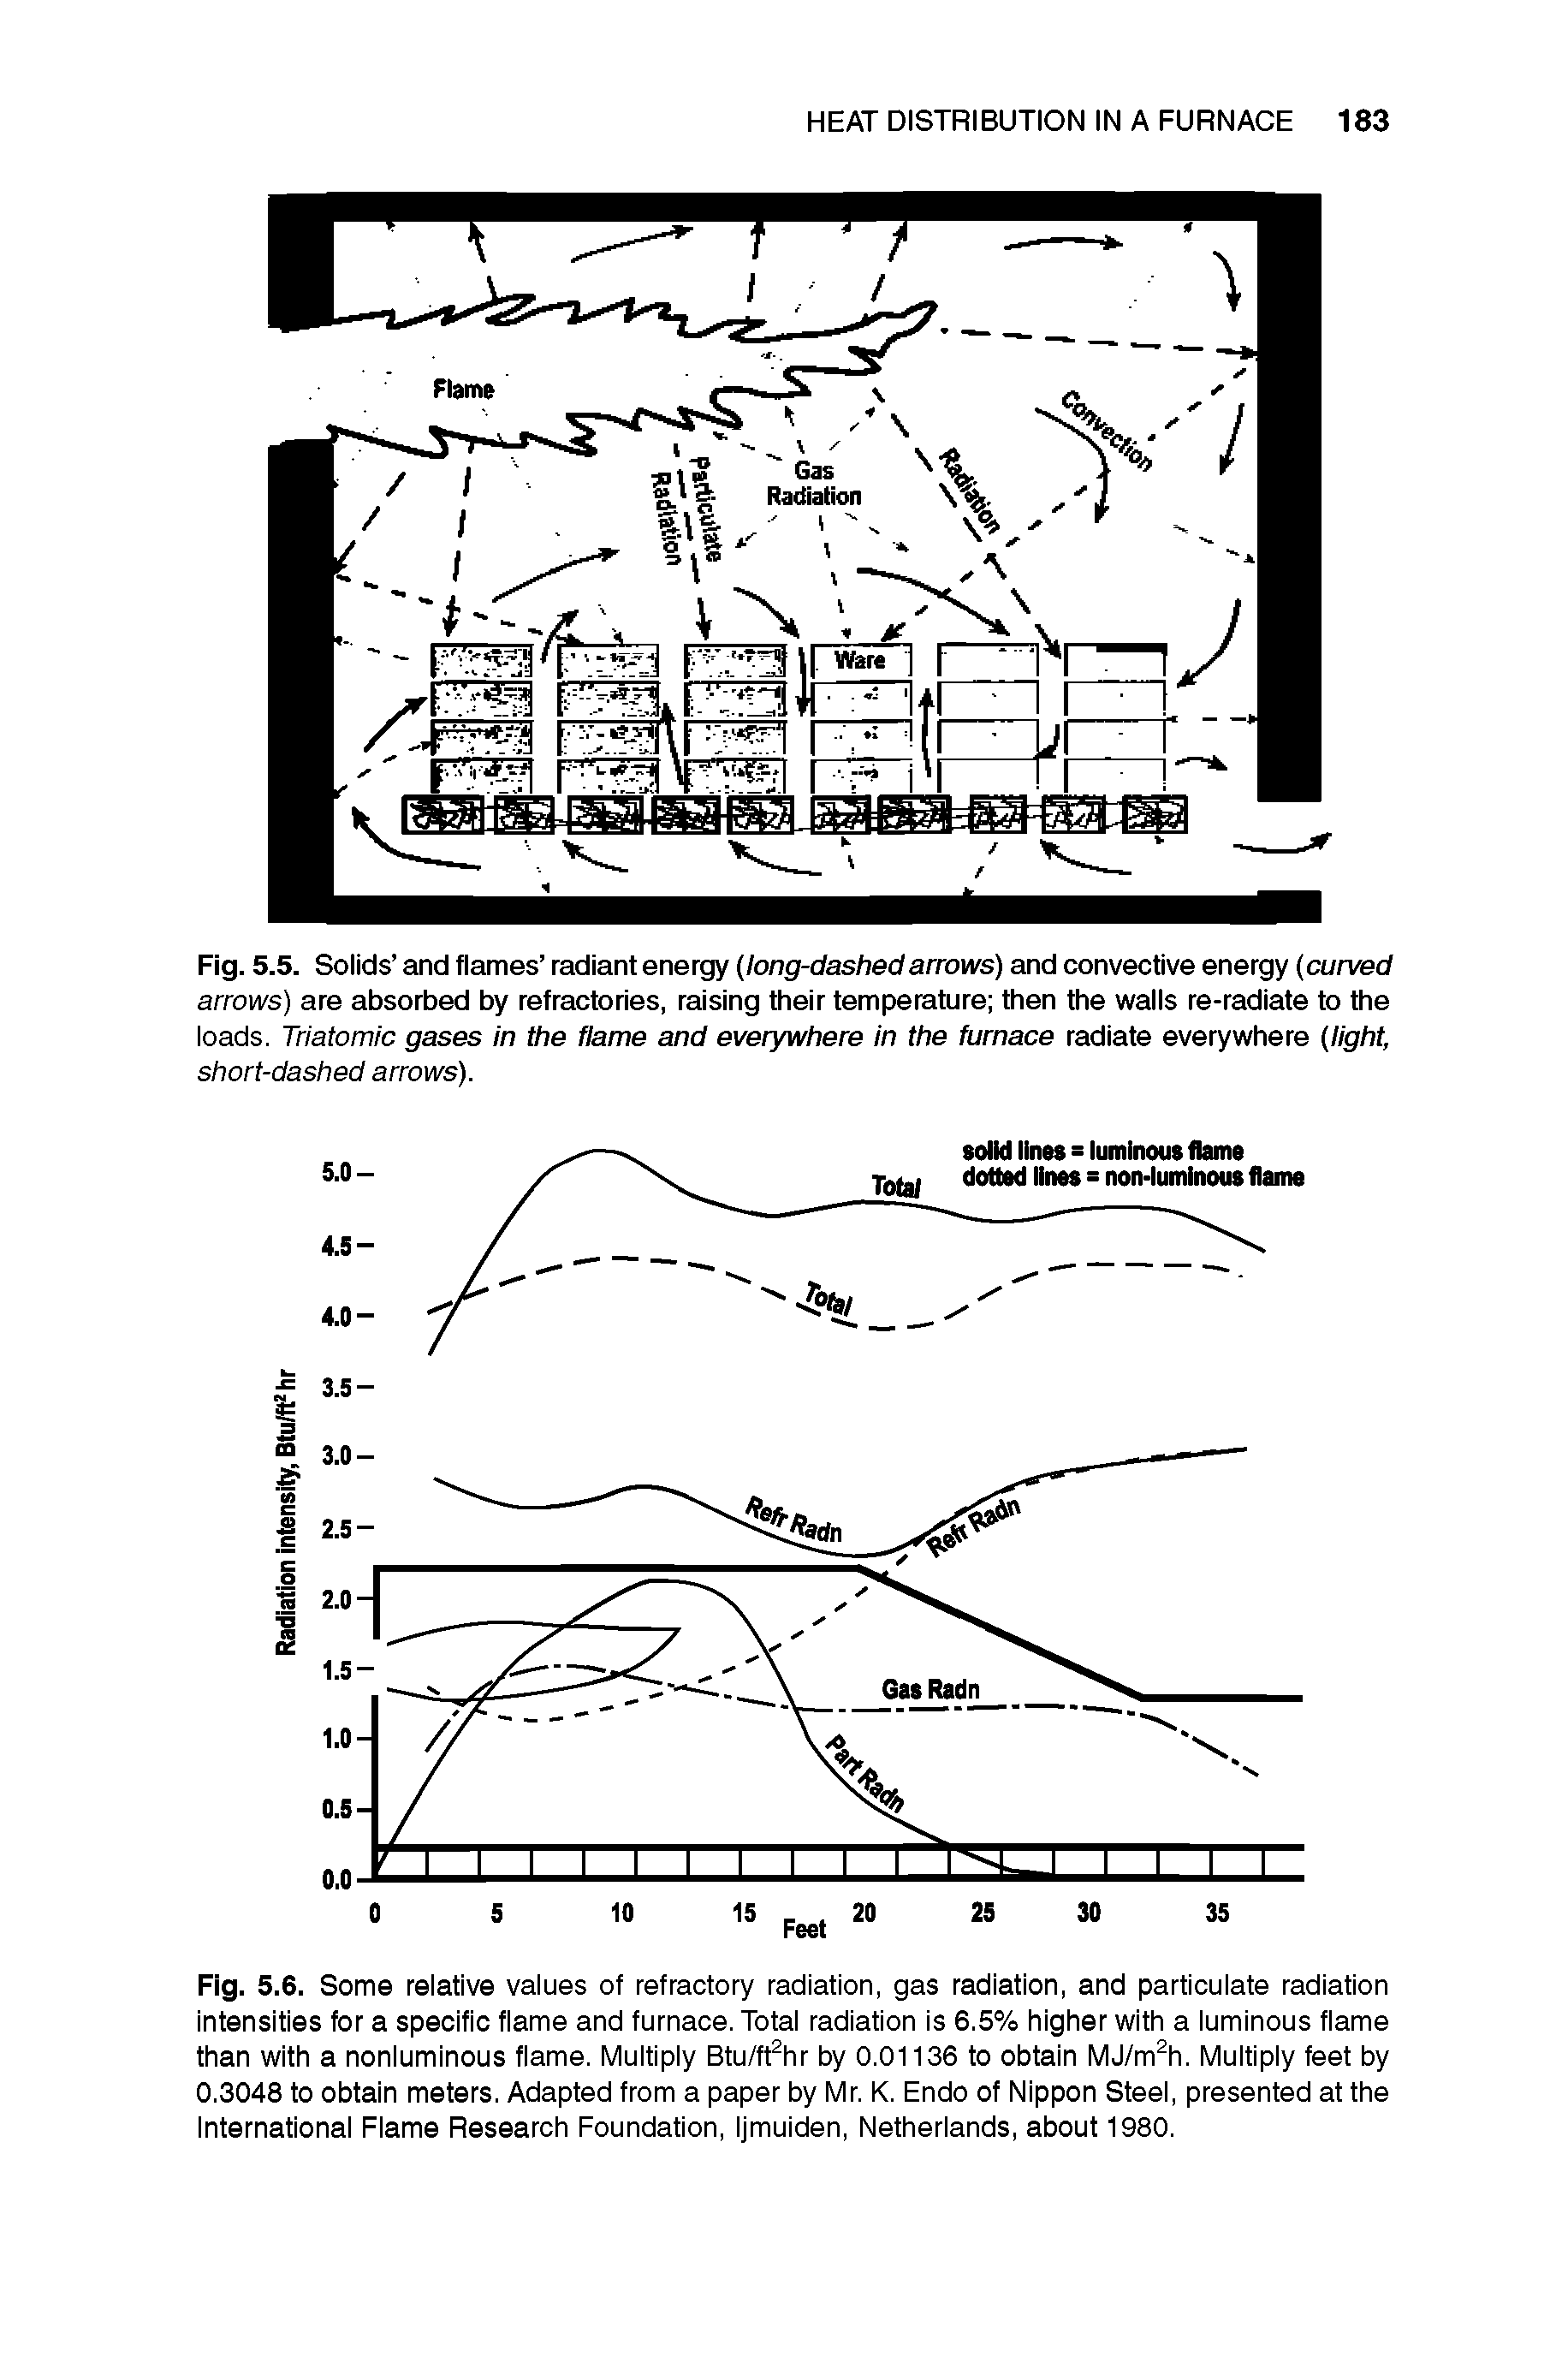 Fig. 5.5. Solids and flames radiant energy long-dashedarrows) and convective energy curved arrows) are absorbed by refractories, raising their temperature then the walls re-radiate to the loads. Triatomic gases in the flame and everywhere in the furnace radiate everywhere light, short-dashed arrows).